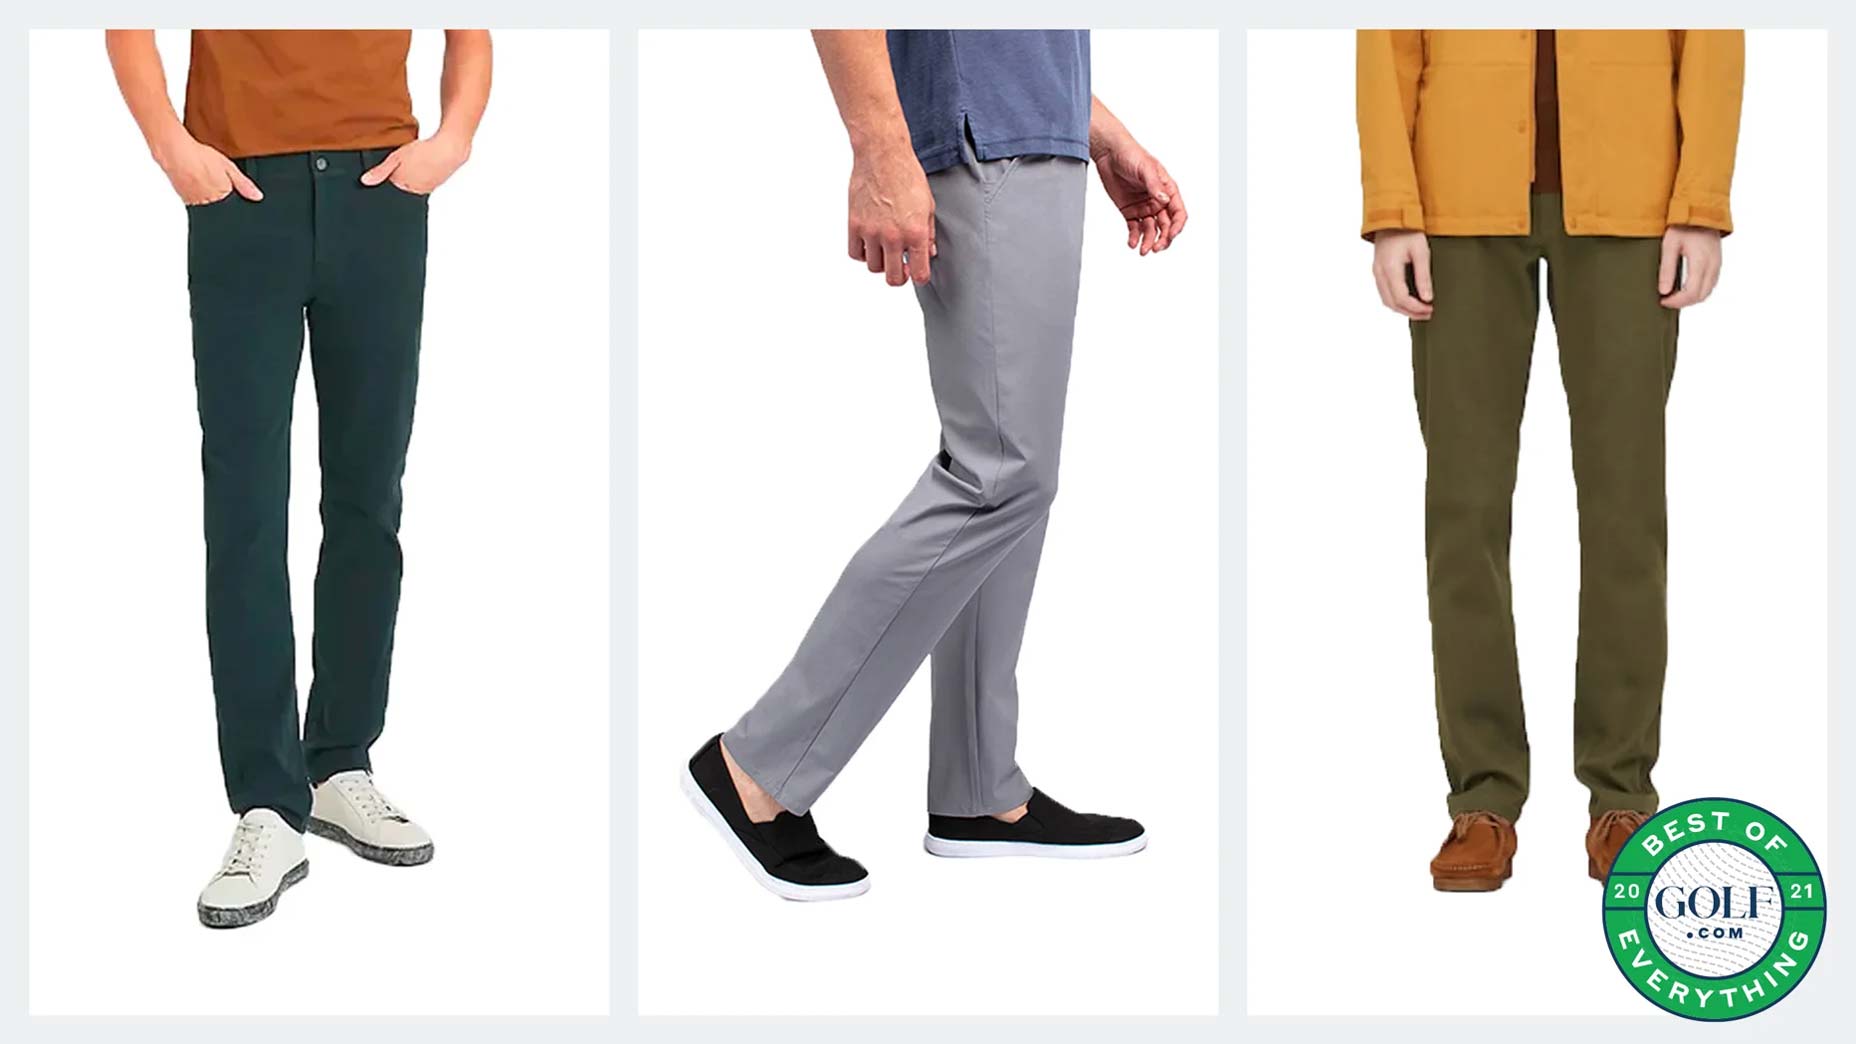 5 warm pairs of pants for those chilly winter rounds